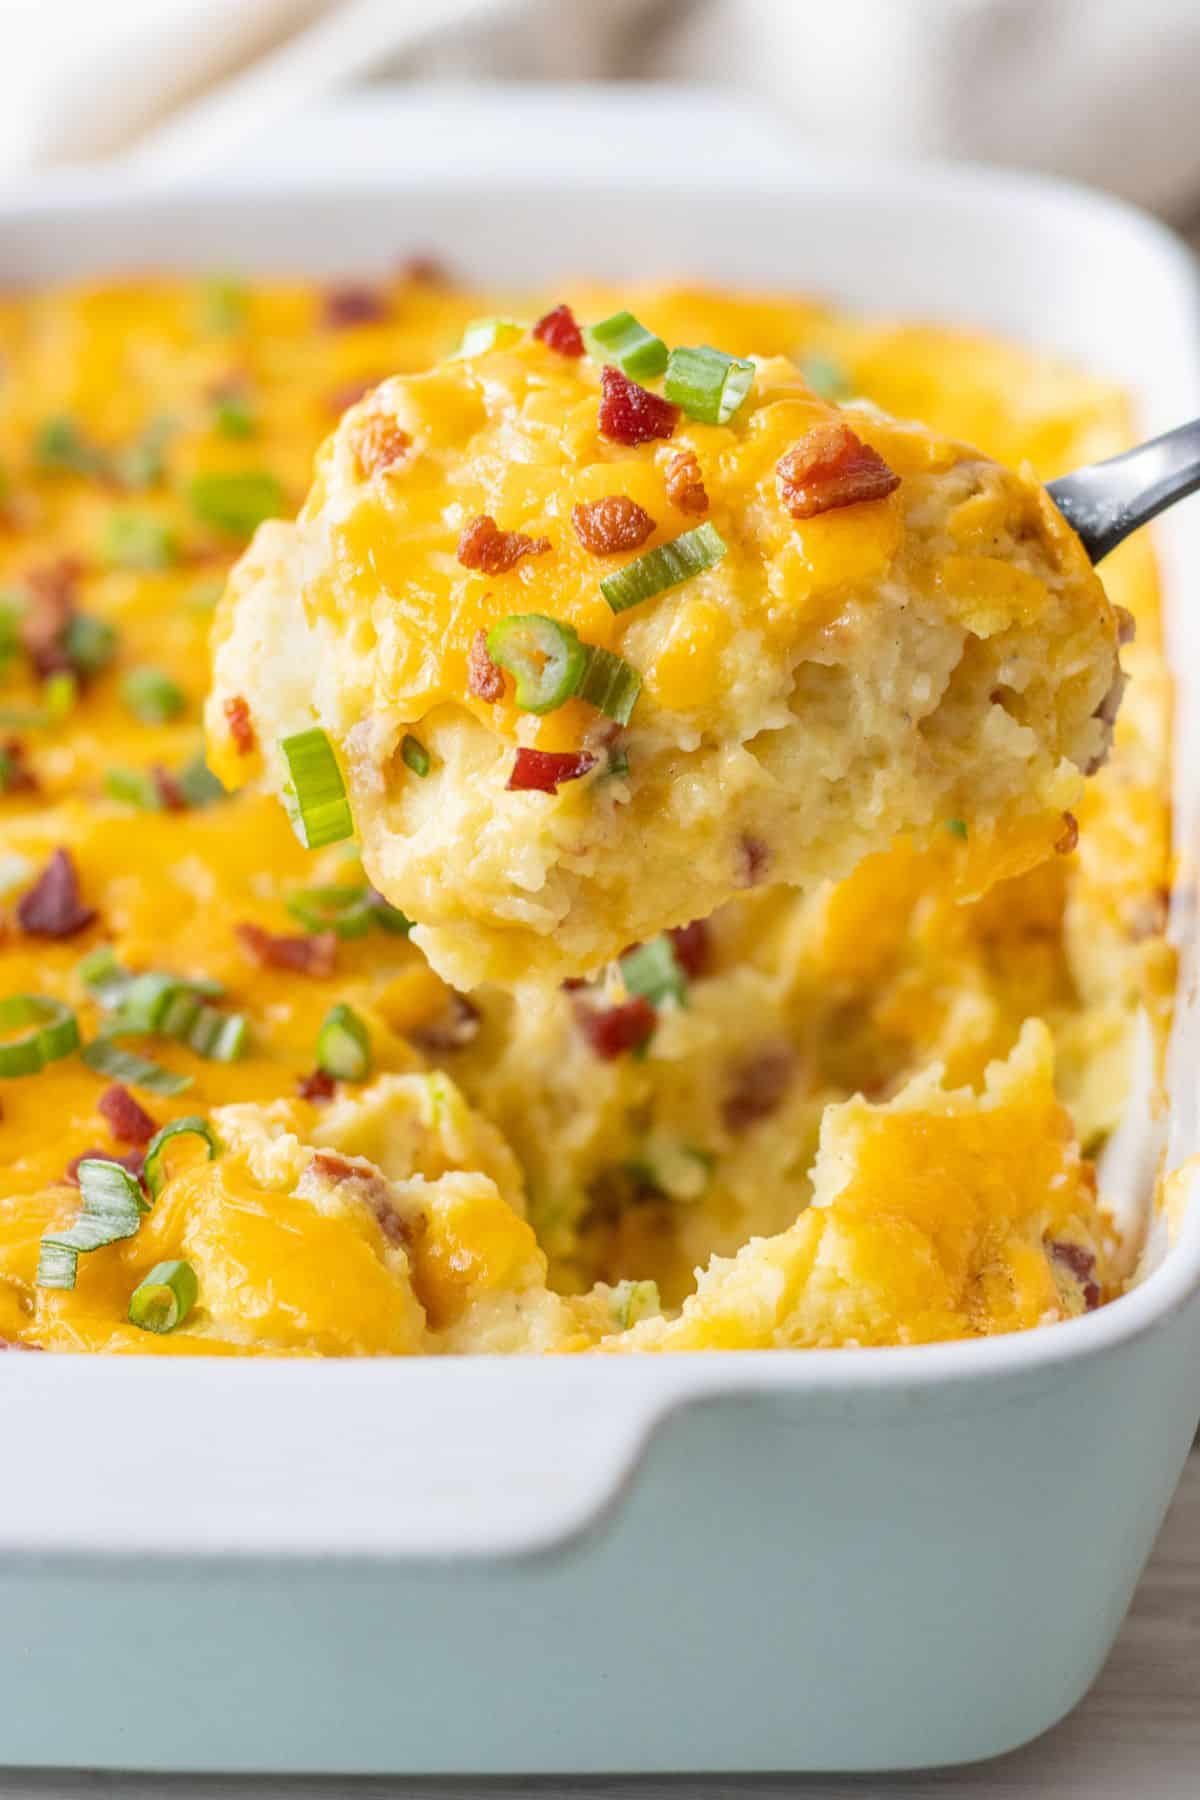 Loaded Mashed Potatoes - This Home Kitchen